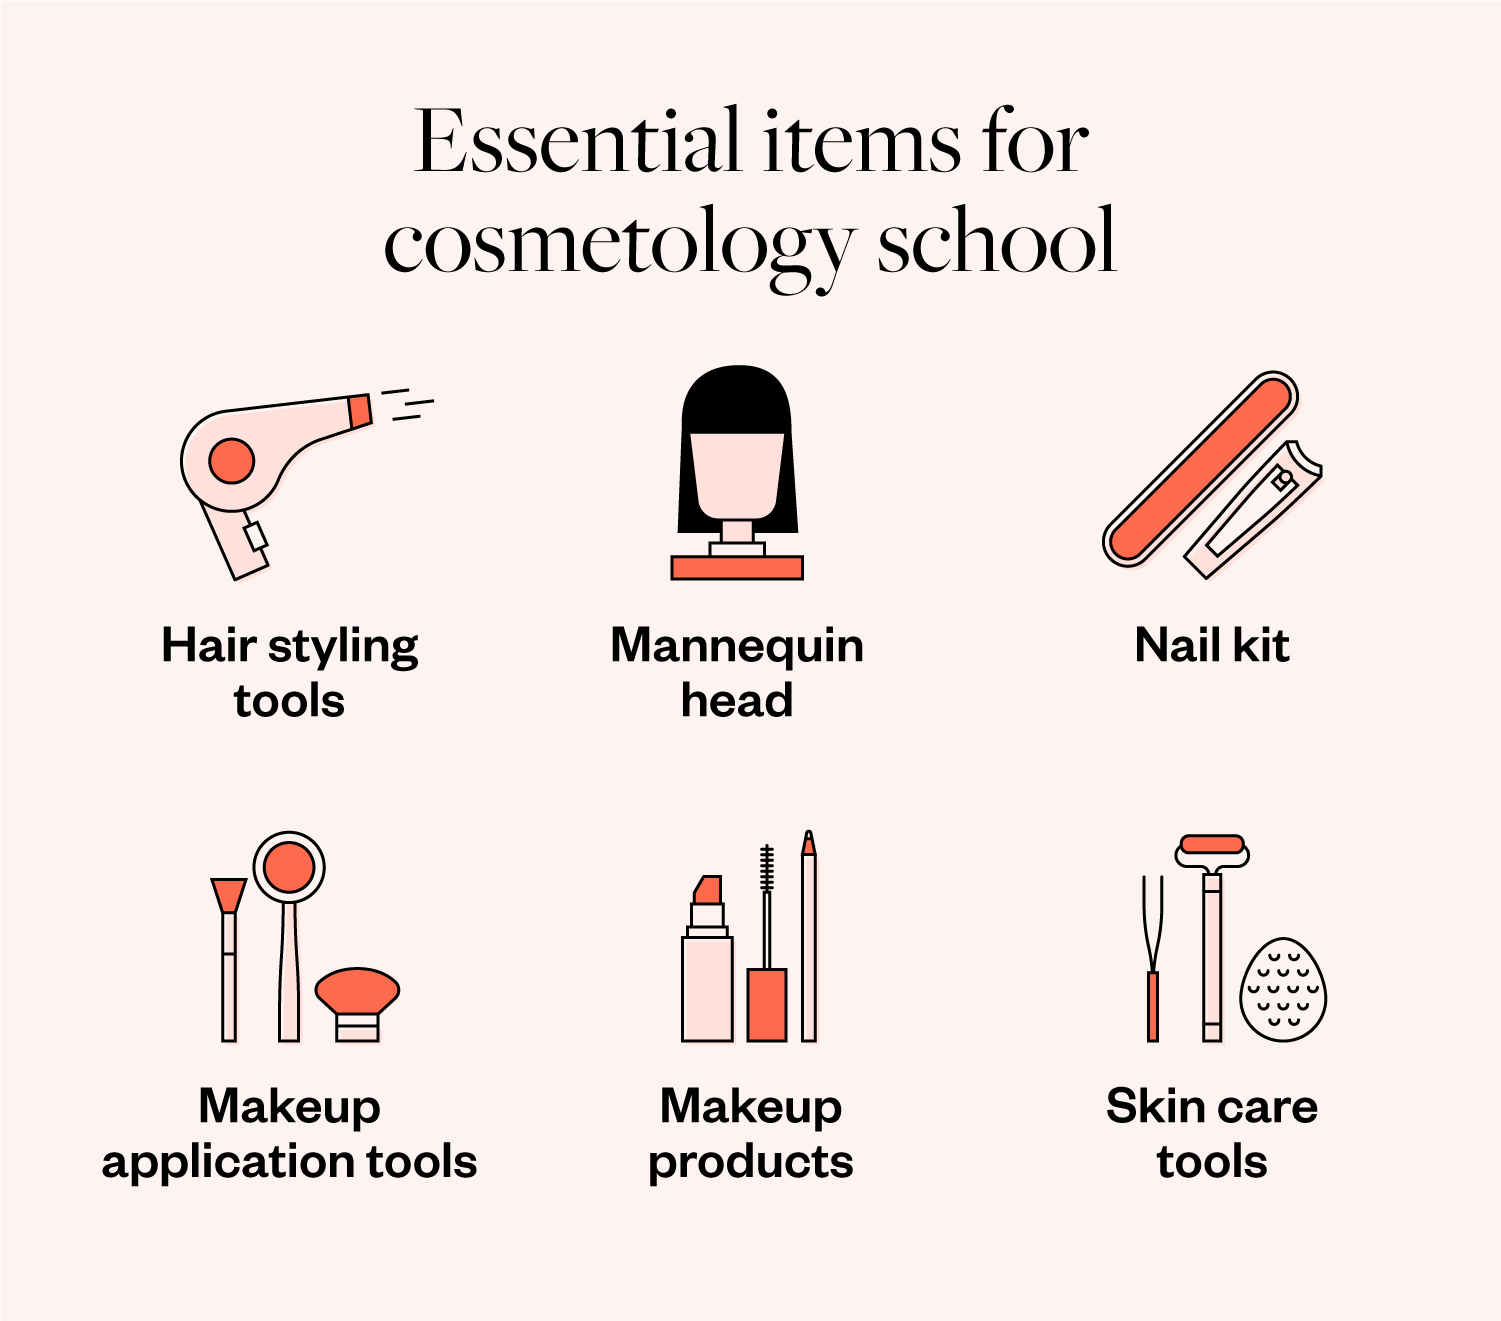 03-Essential-items-for-cosmetology-school